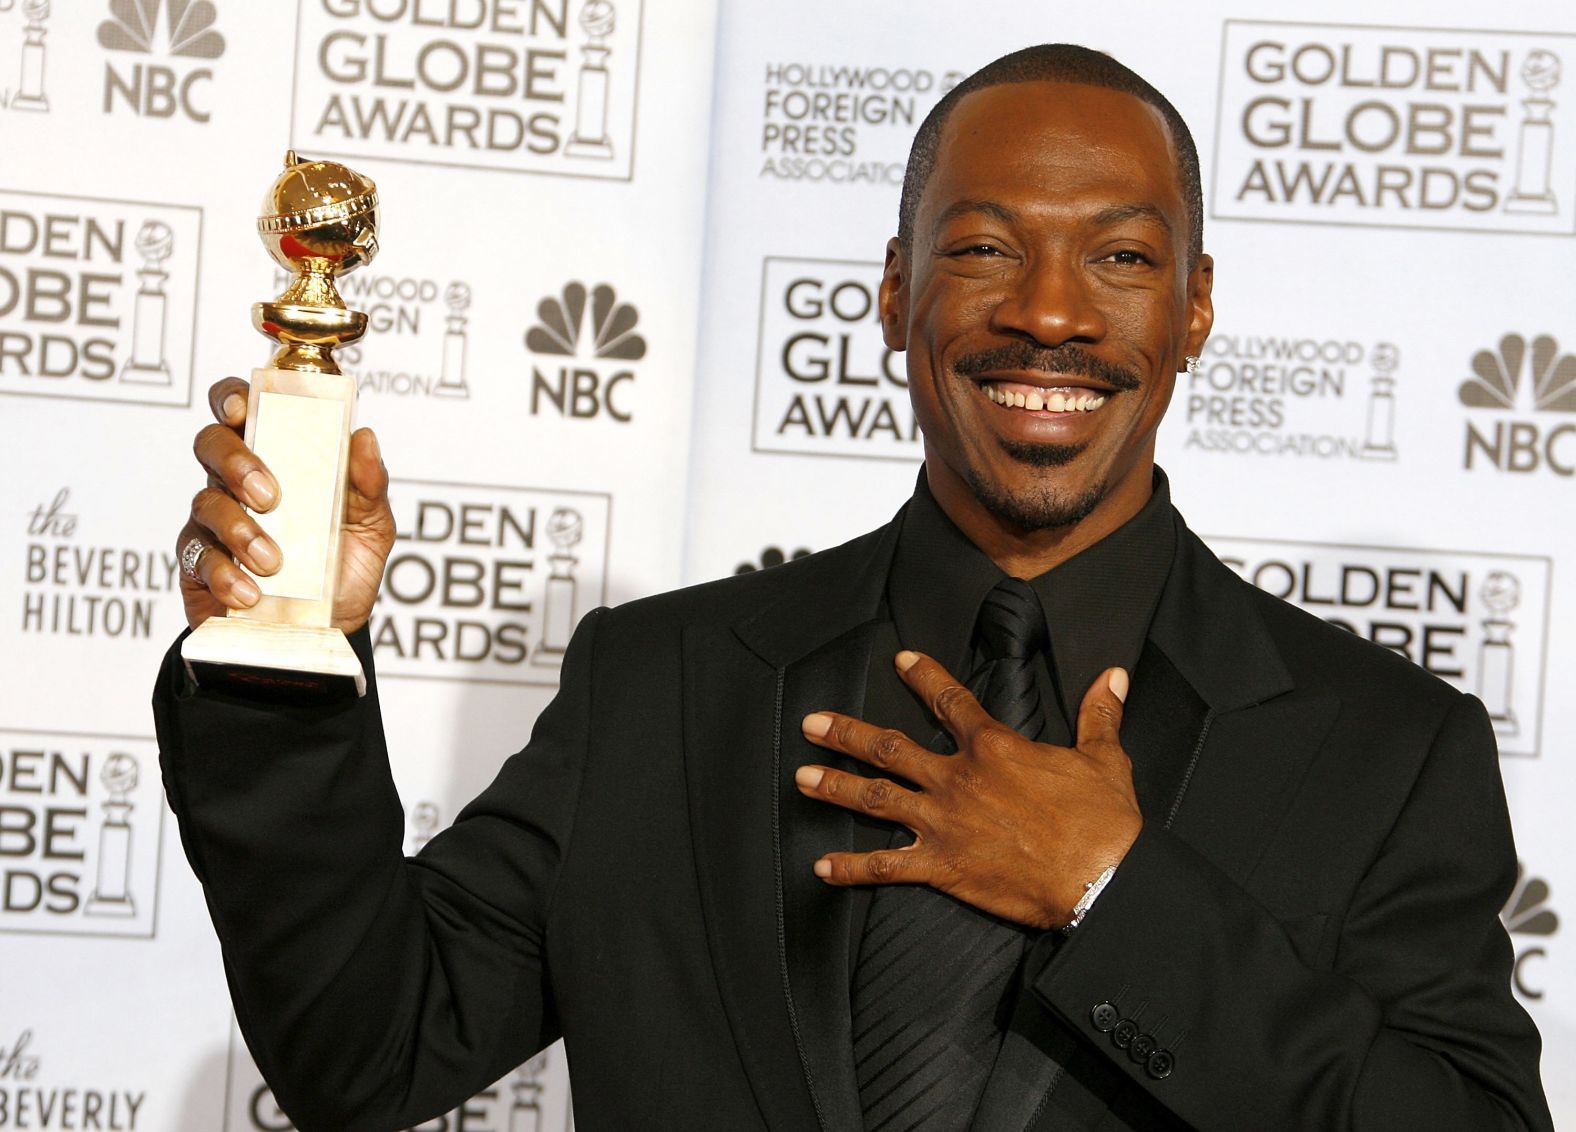 Murphy won a Golden Globe for his performance in "Dreamgirls."